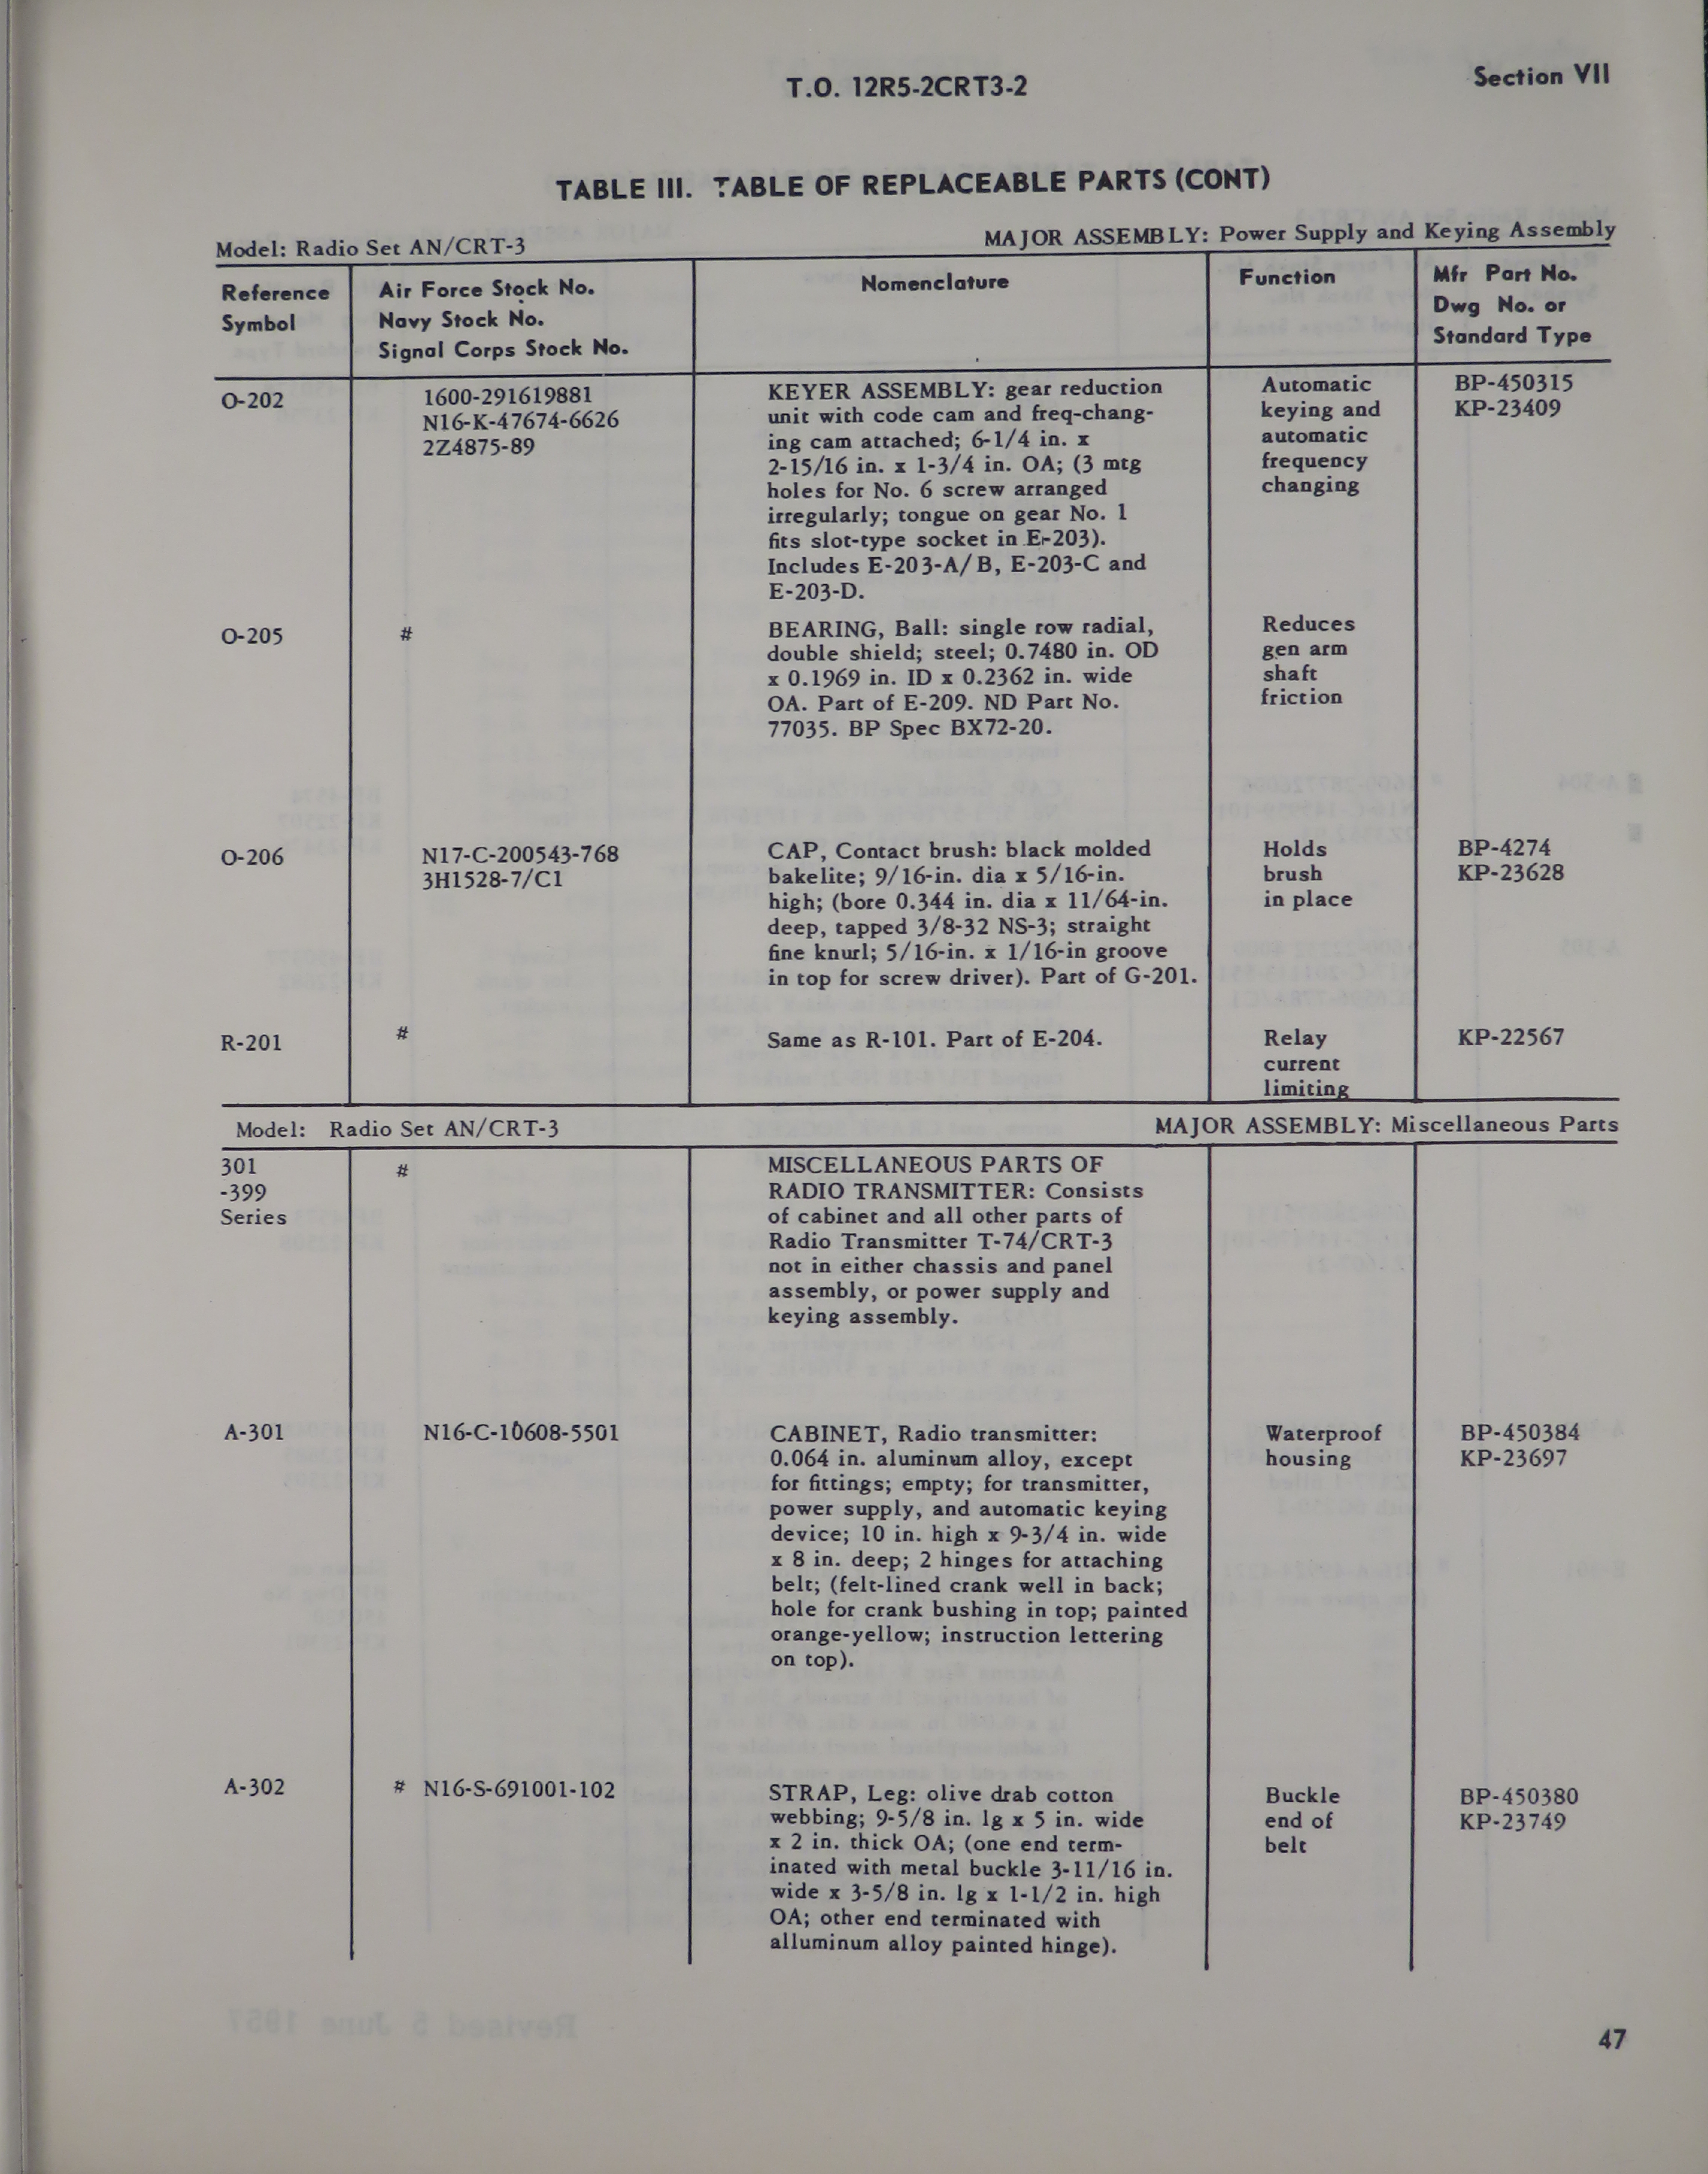 Sample page 5 from AirCorps Library document: Maintenance Instructions for Radio Set AN/CRT-3